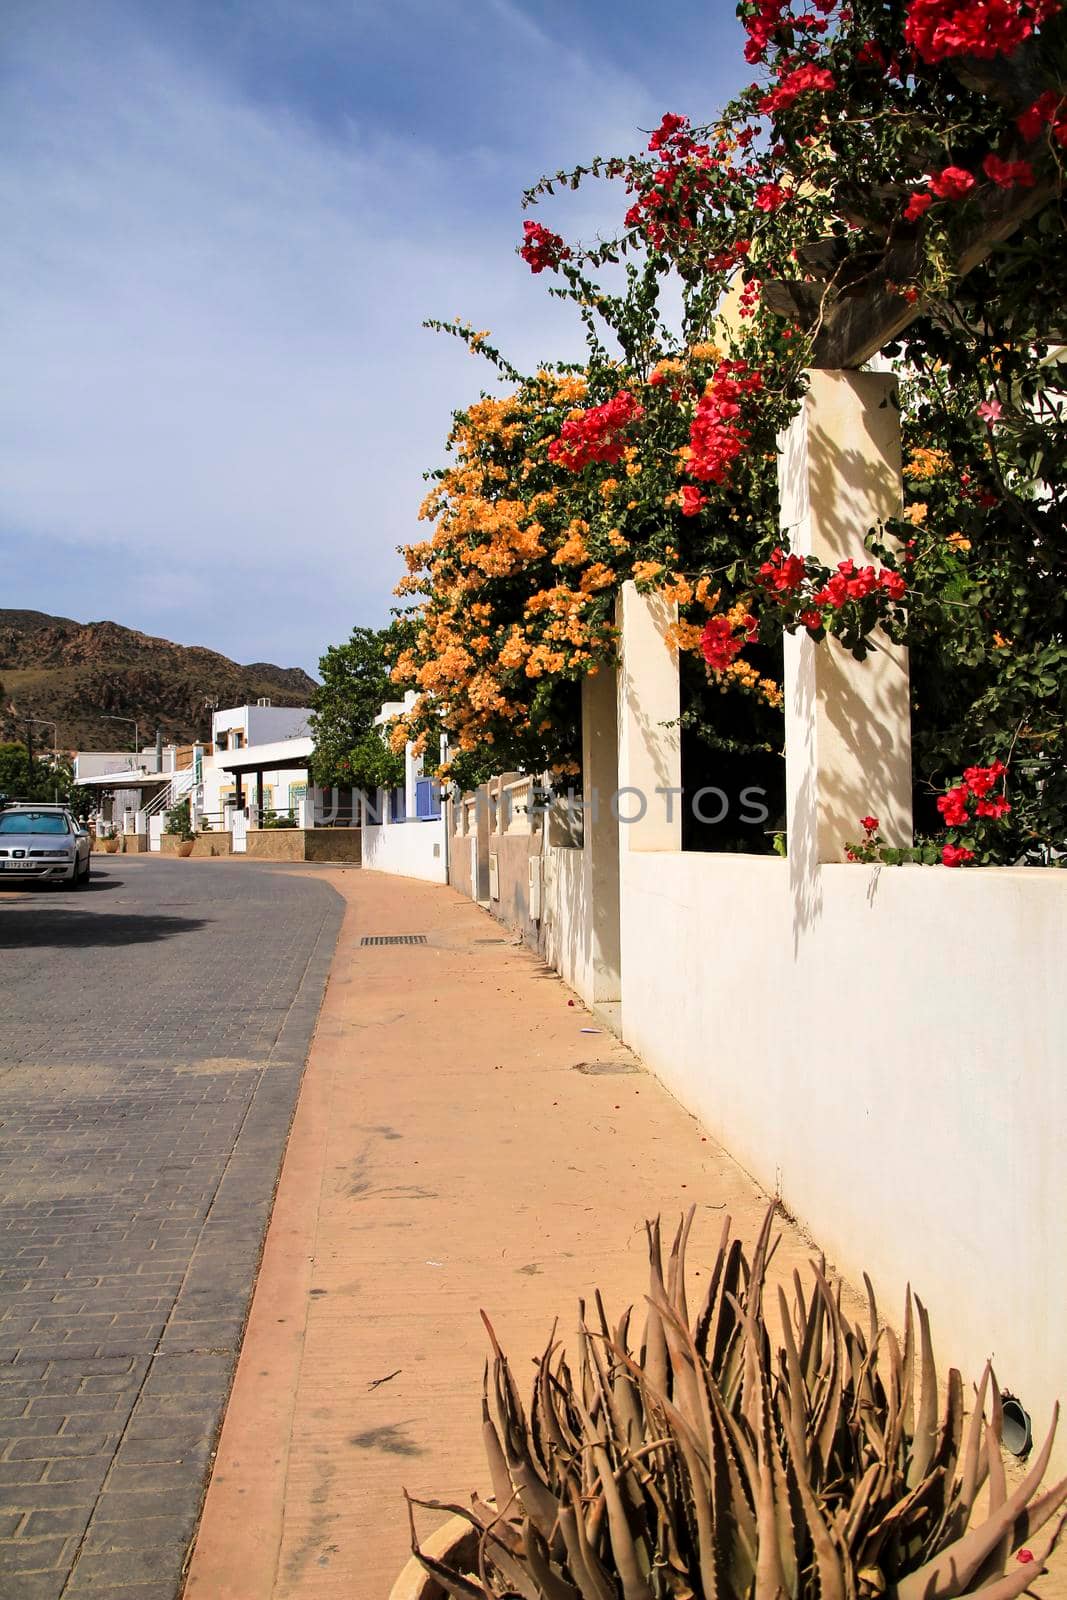 Rodalquilar, Almeria, Spain- September 7, 2021: Whitewashed houses with bougainvillea and cactus in Rodalquilar, Andalusia, Spain